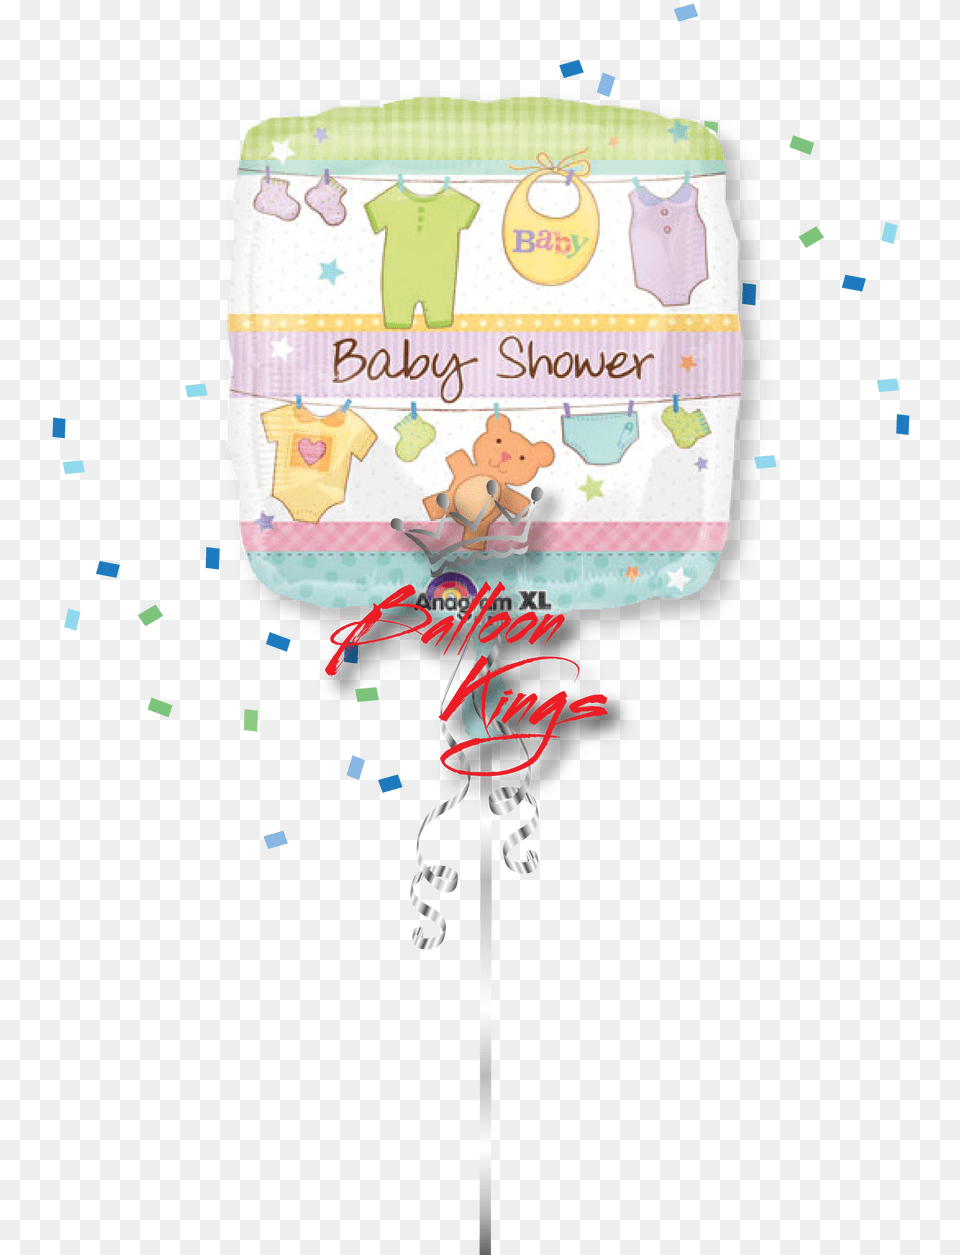 Baby Shower Cuddly Clothesline 1st Birthday Balloon, Diaper, Lamp, Cushion, Home Decor Png Image